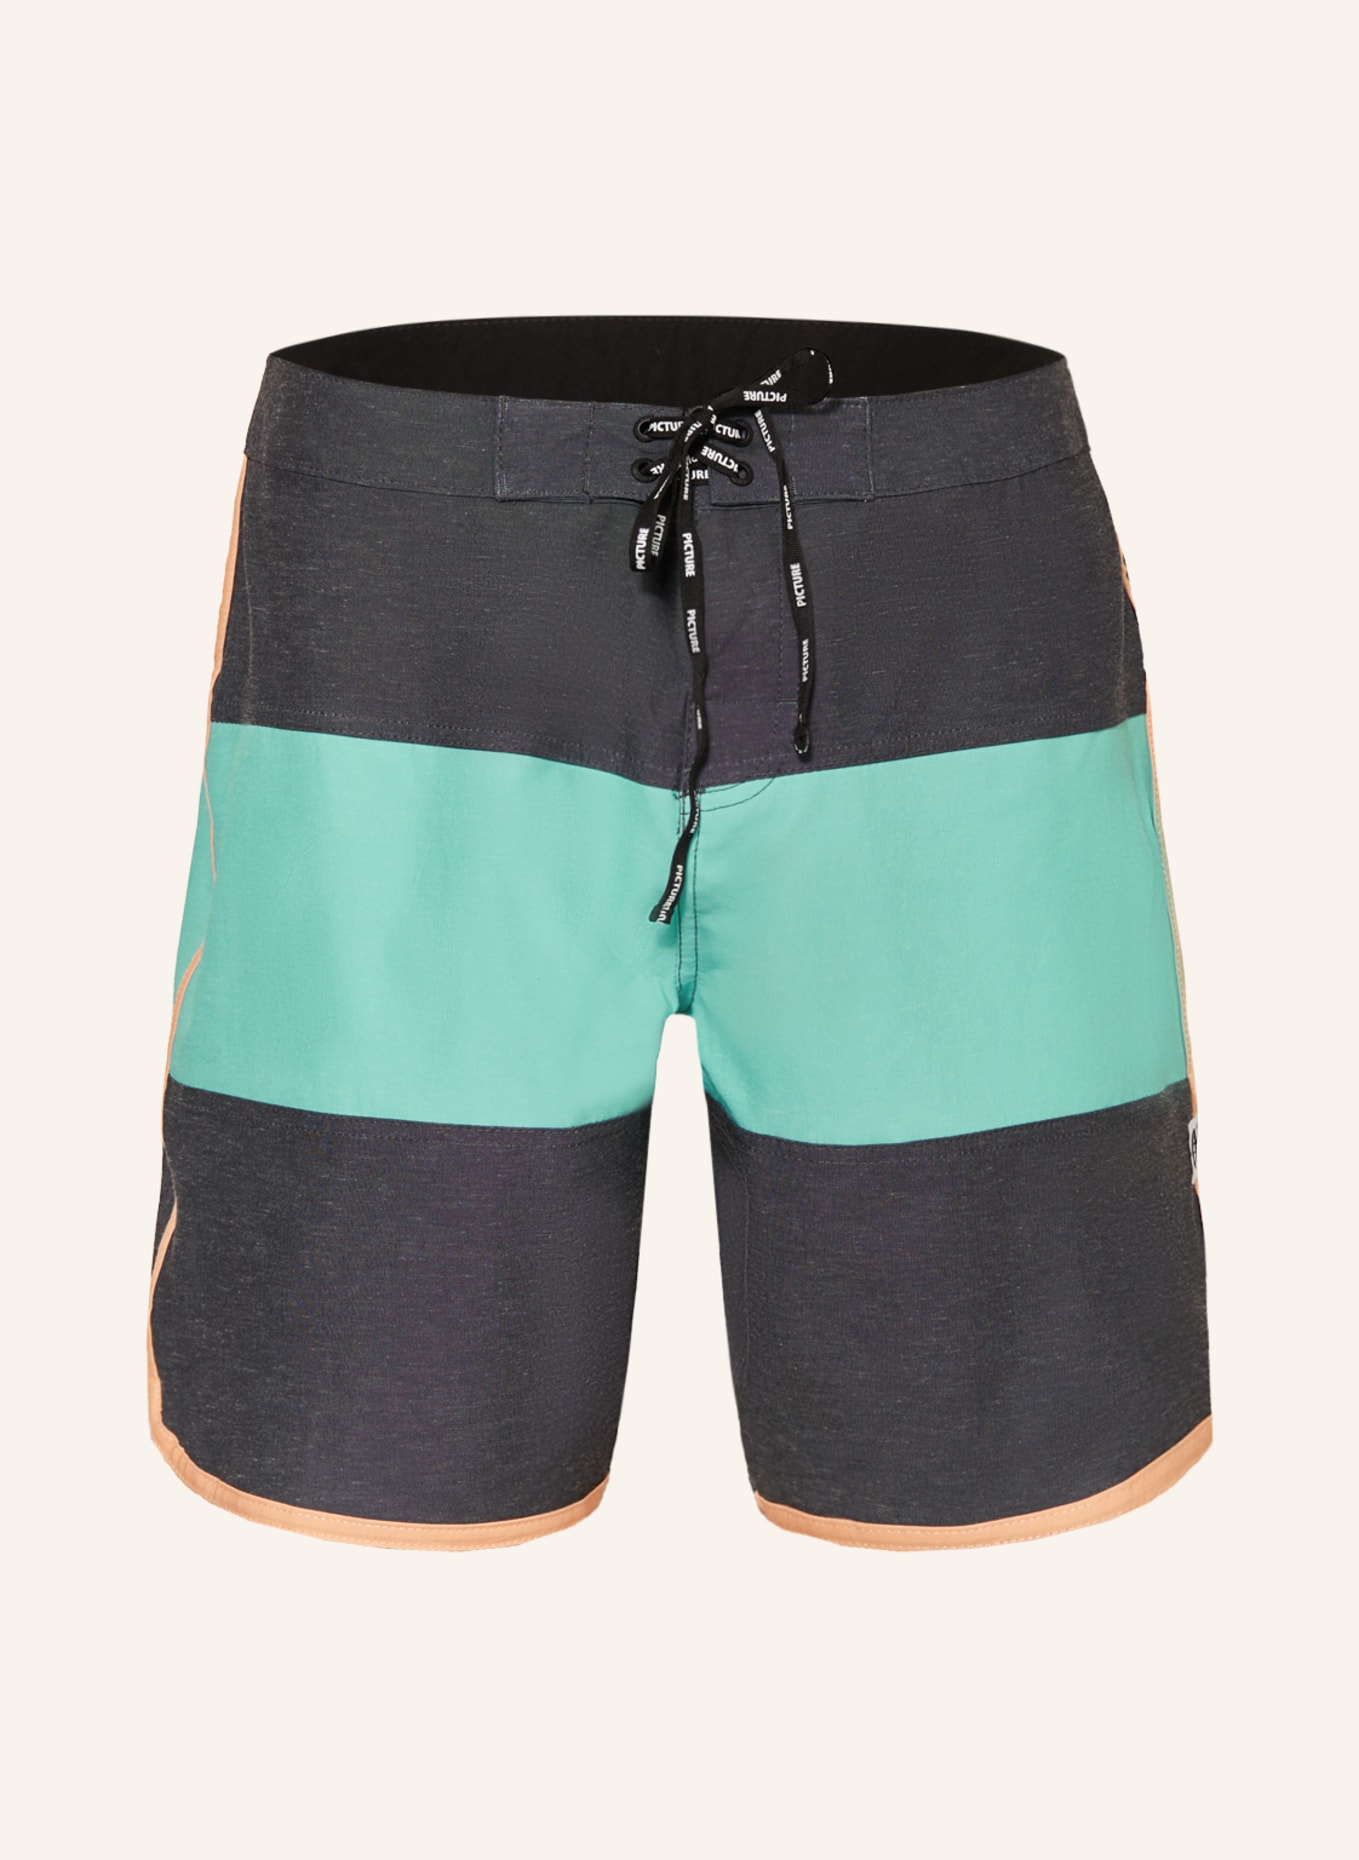 PICTURE Badeshorts ANDY HERITAGE SOLID 17, Farbe: GRAU/ MINT (Bild 1)